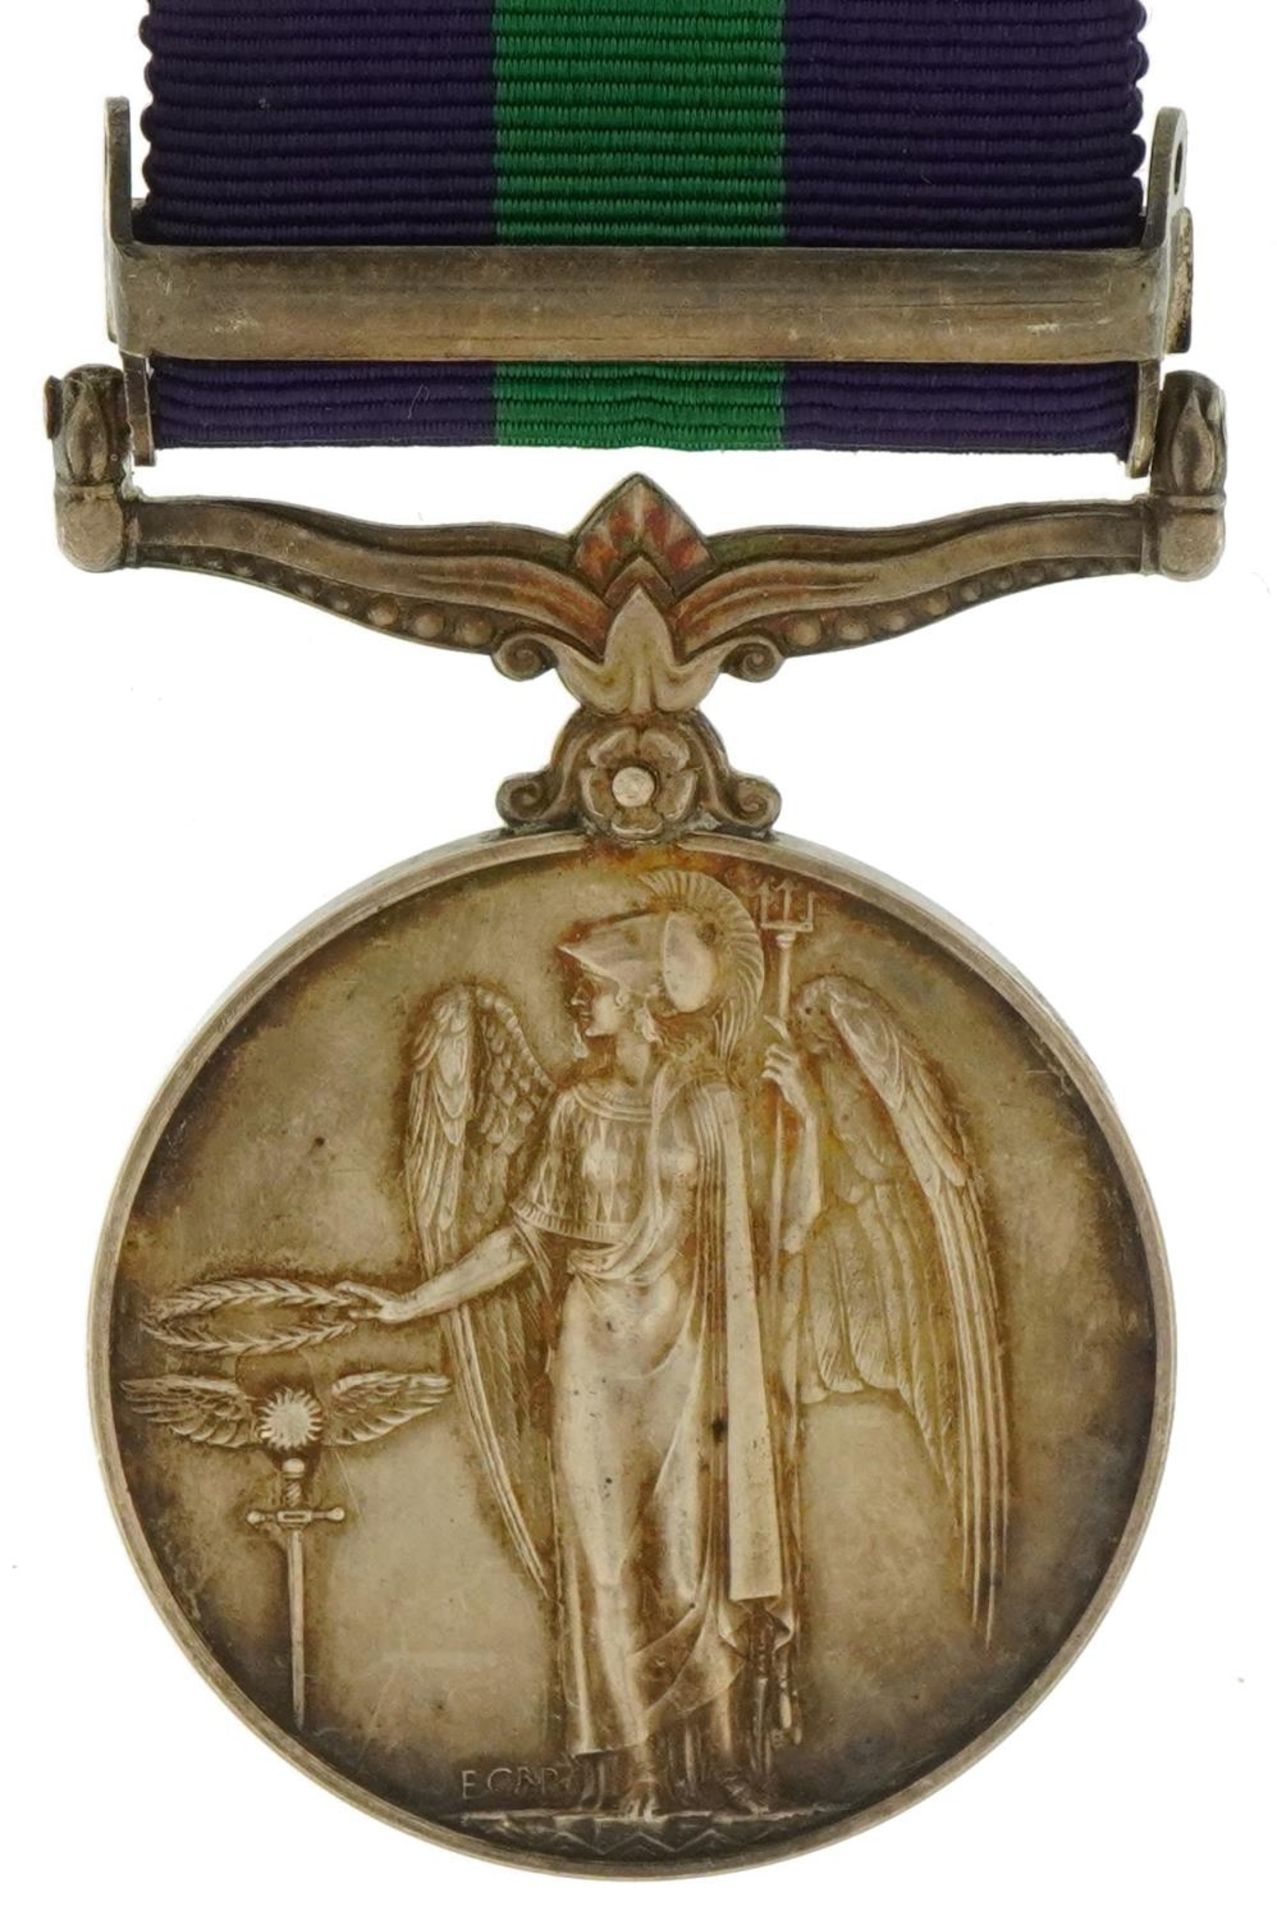 British military World War II General Service medal with Palestine bar awarded to 6396901PTE.J.H. - Image 3 of 4